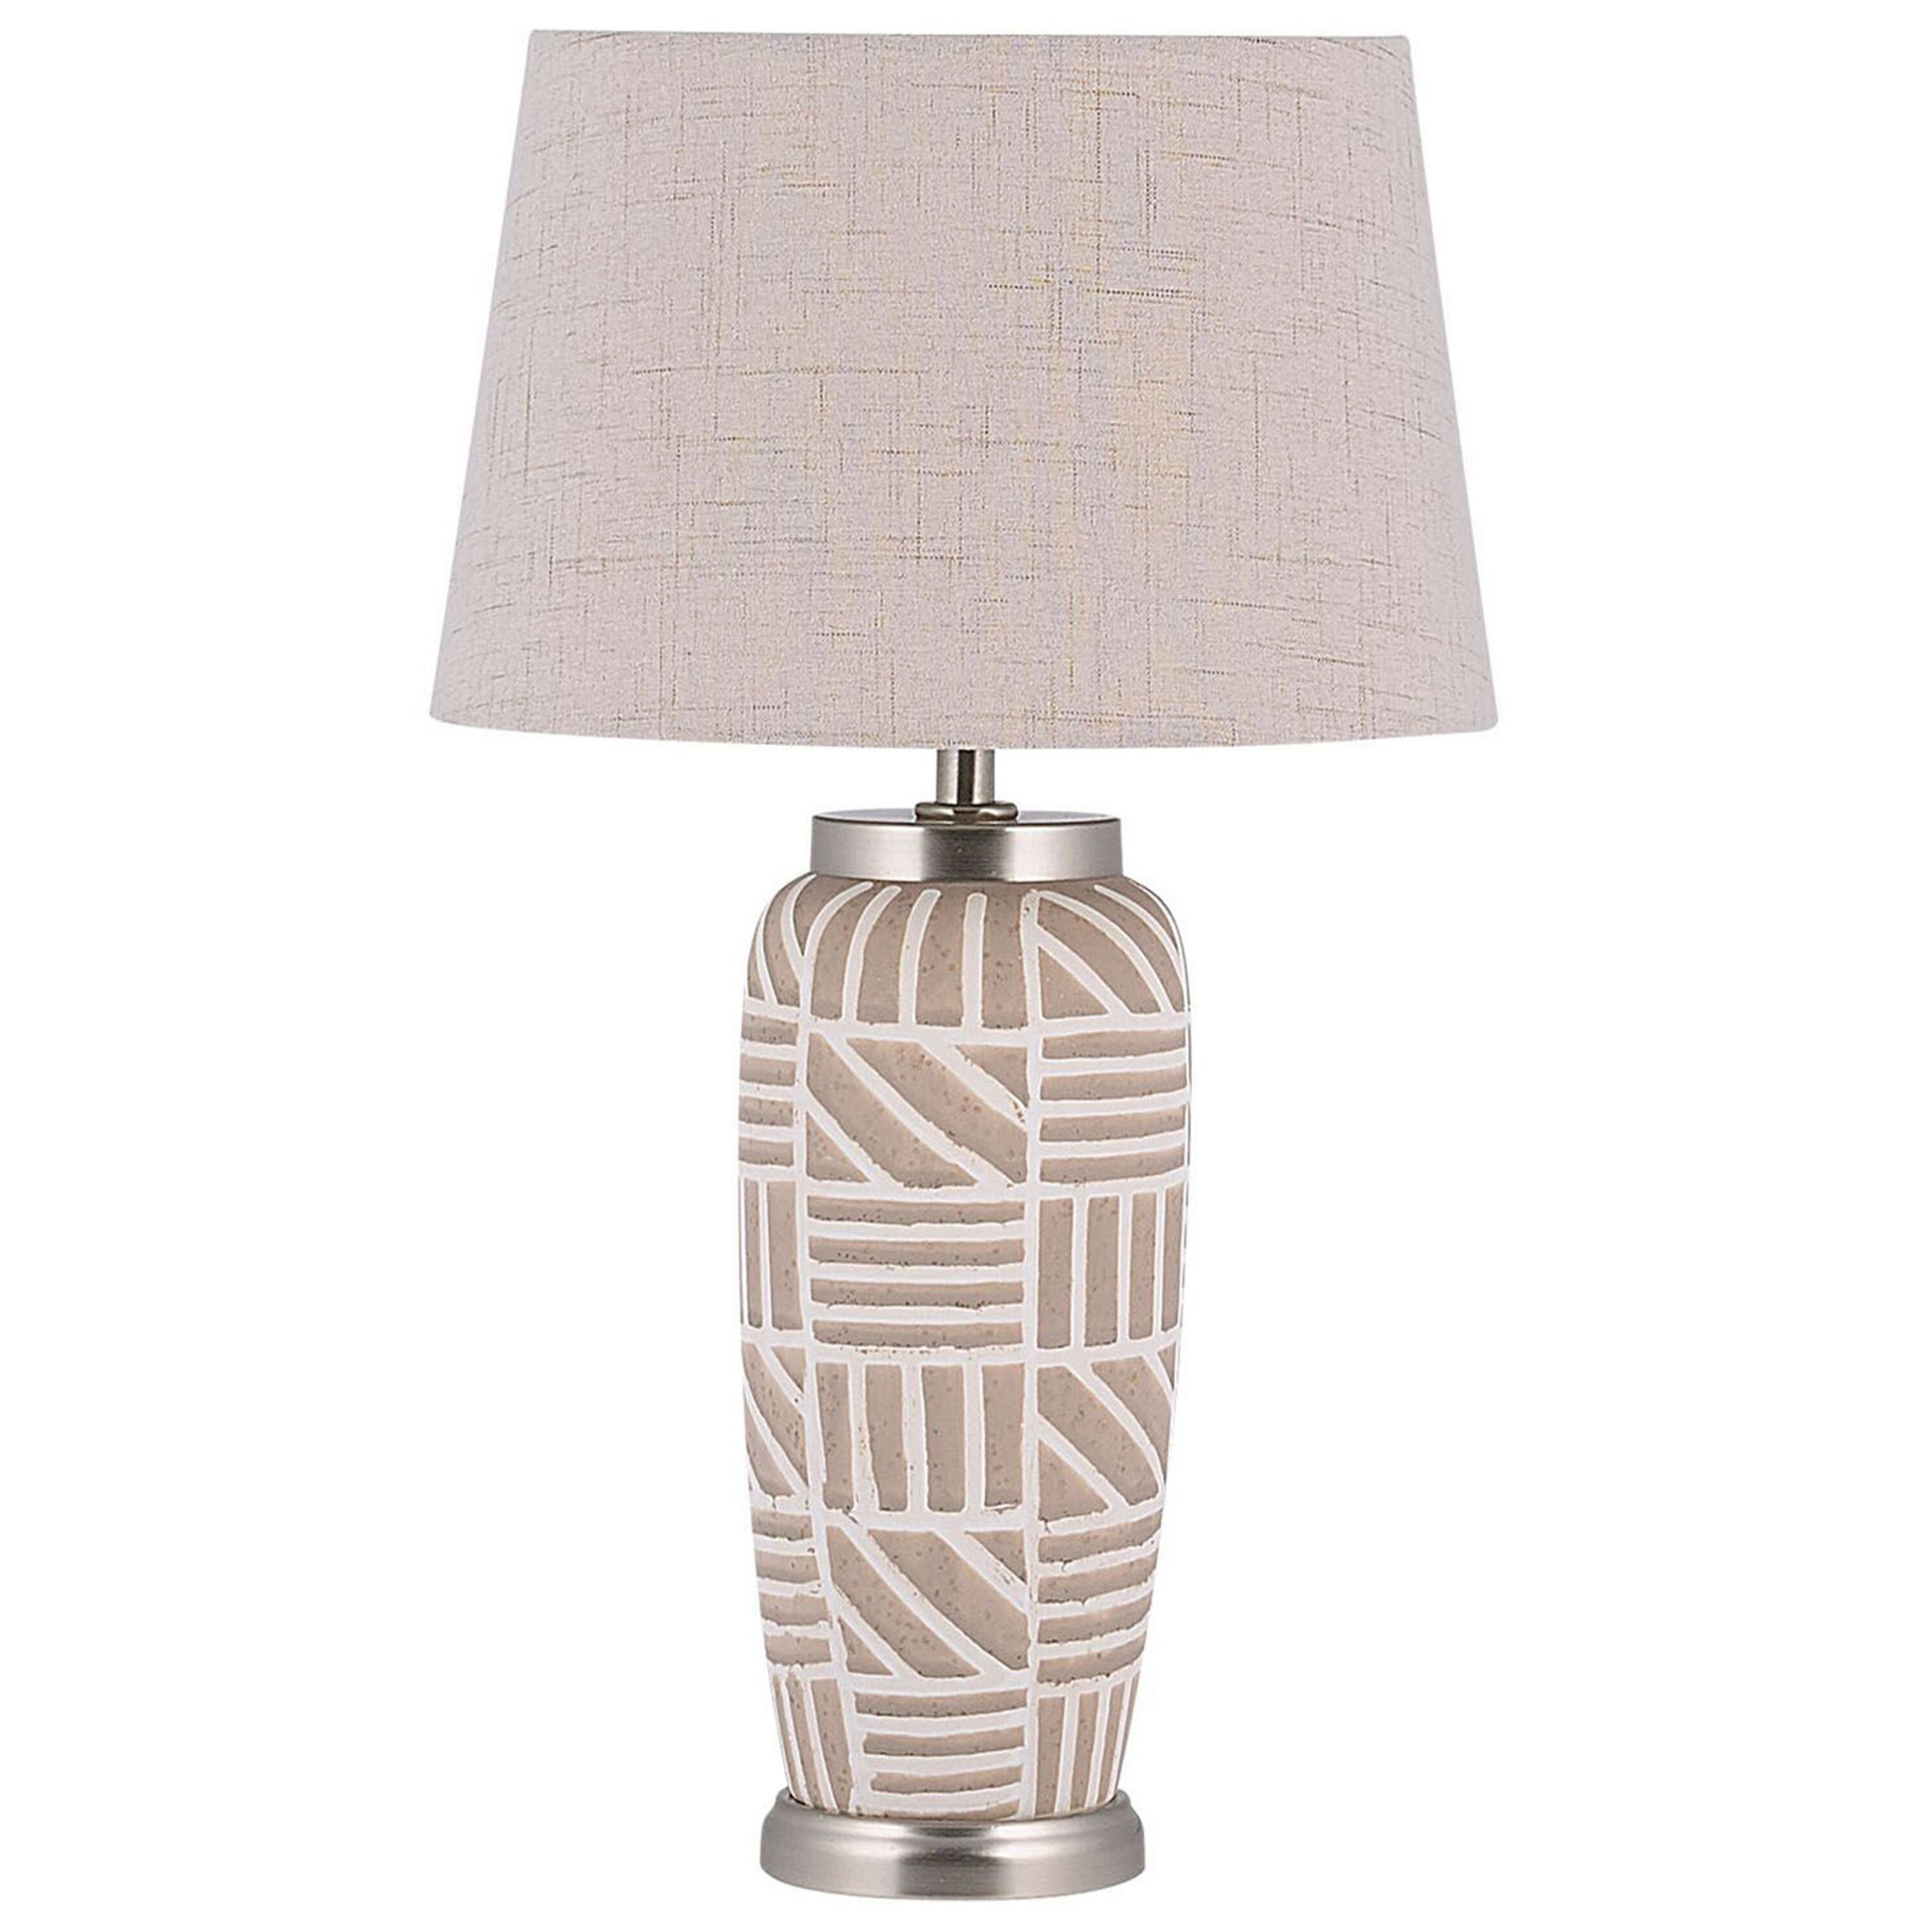 Beliani Bedside Table Lamp Beige and White Ceramic 48 cm Pattern Stripes Drum Shade Traditional